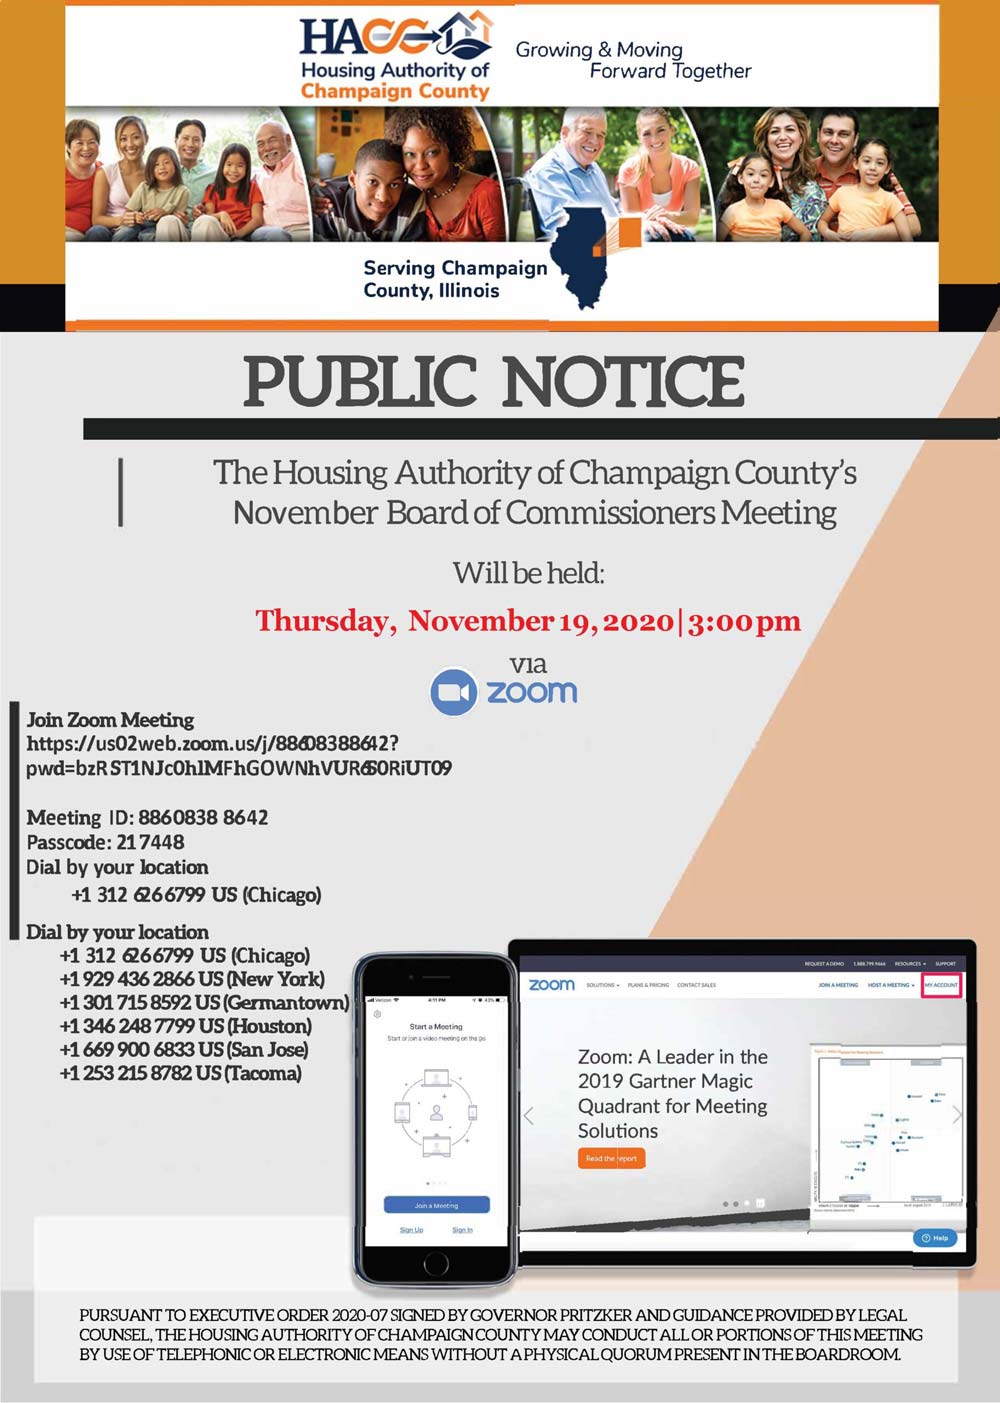 November Board of Commissioners Meeting flyer, all information as listed below.